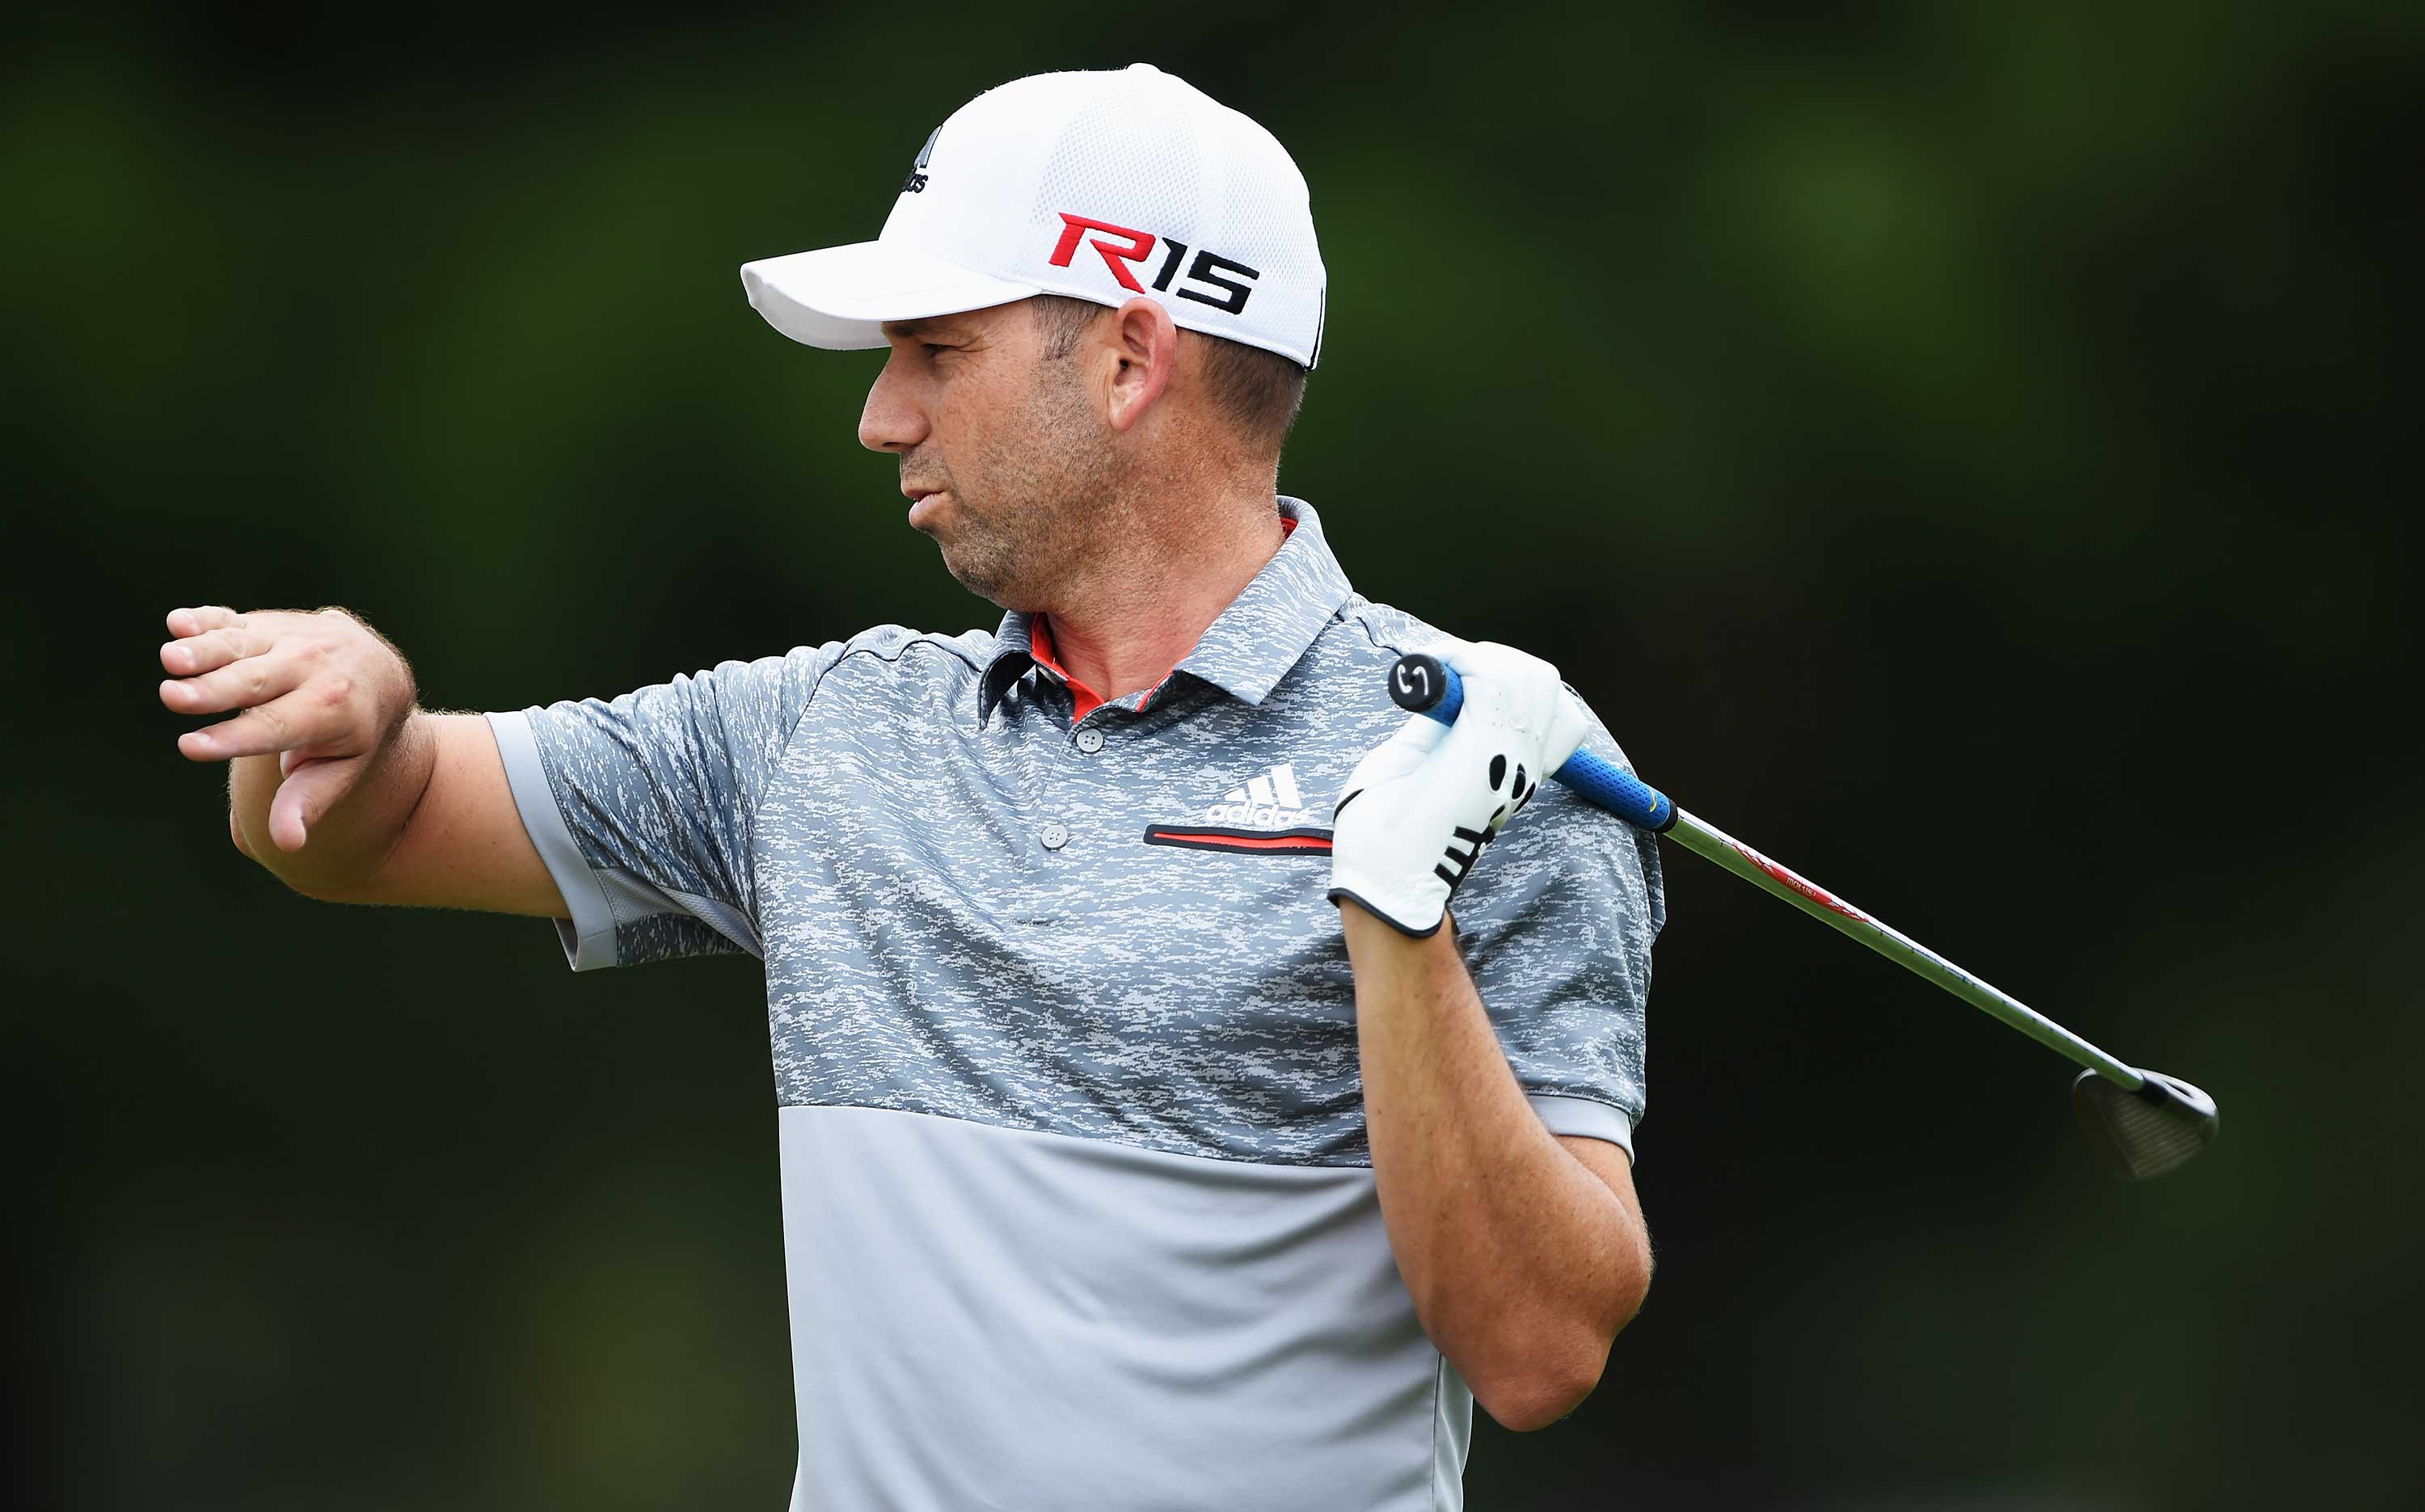 Sergio Garcia has switched to SuperStroke grips in his irons, and TaylorMade has reacted